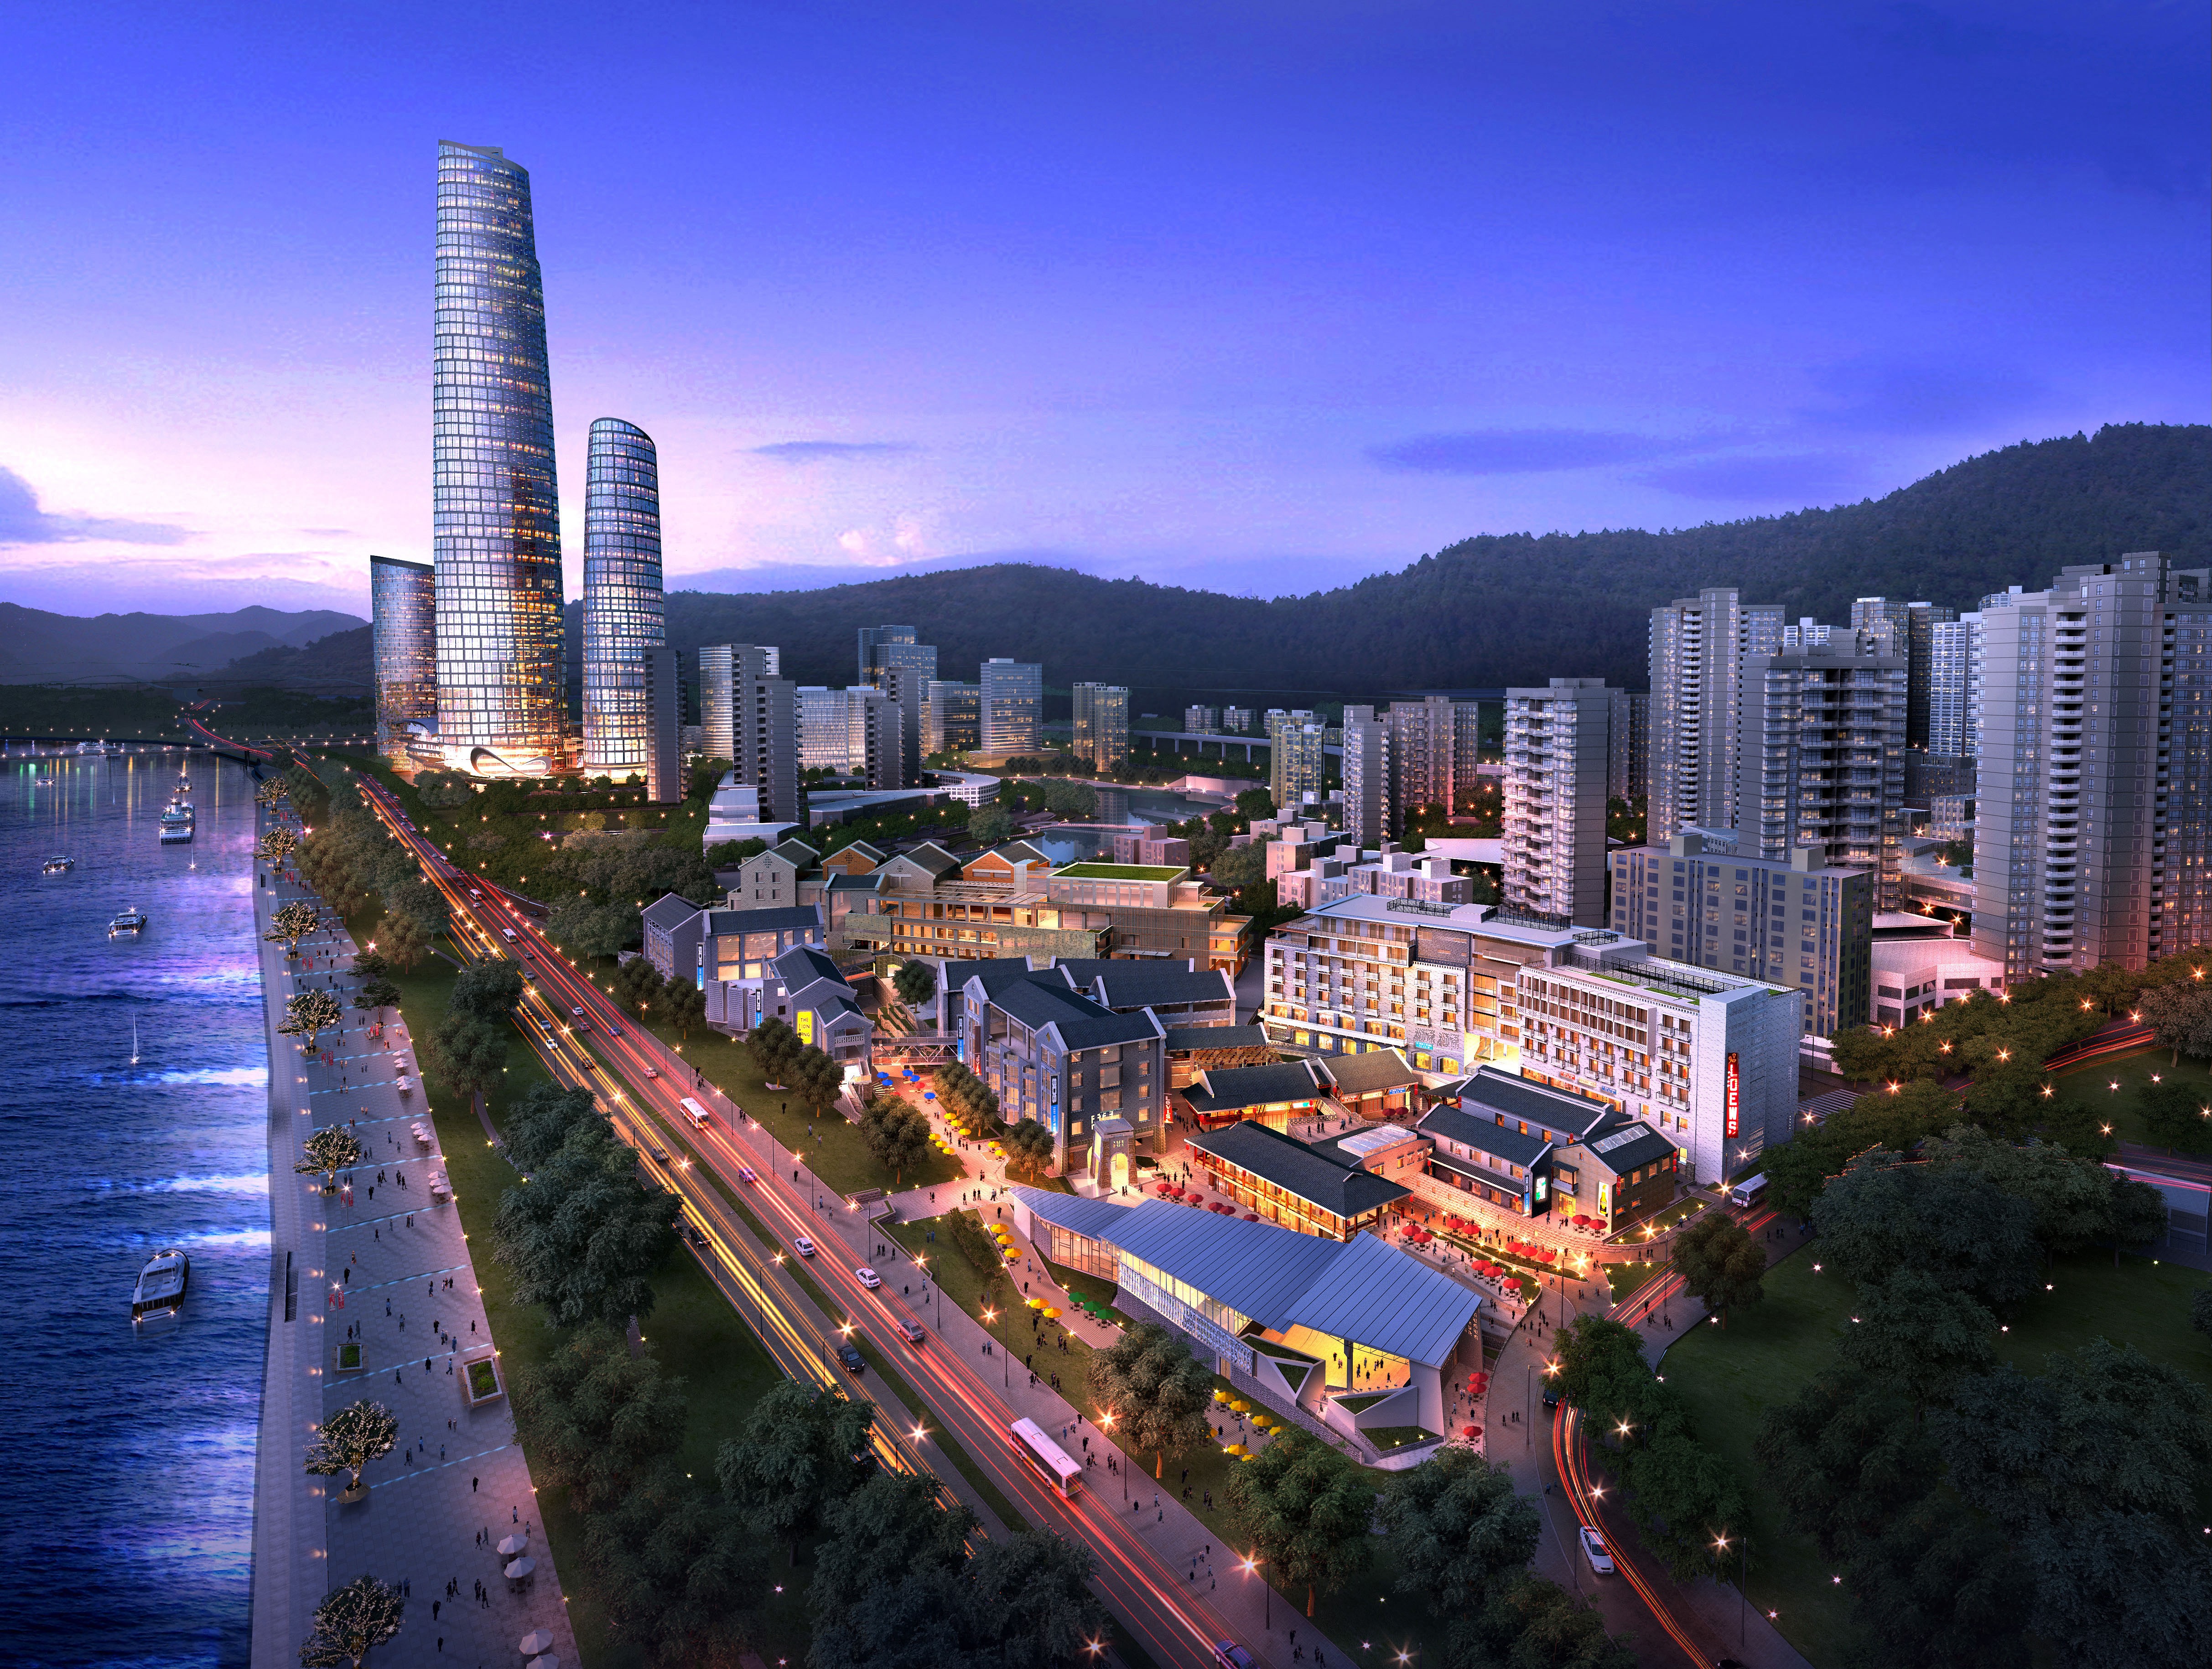 An artist’s impression of the commercial and entertainment areas of the Chongqing Tiandi complex. Photo: Handout